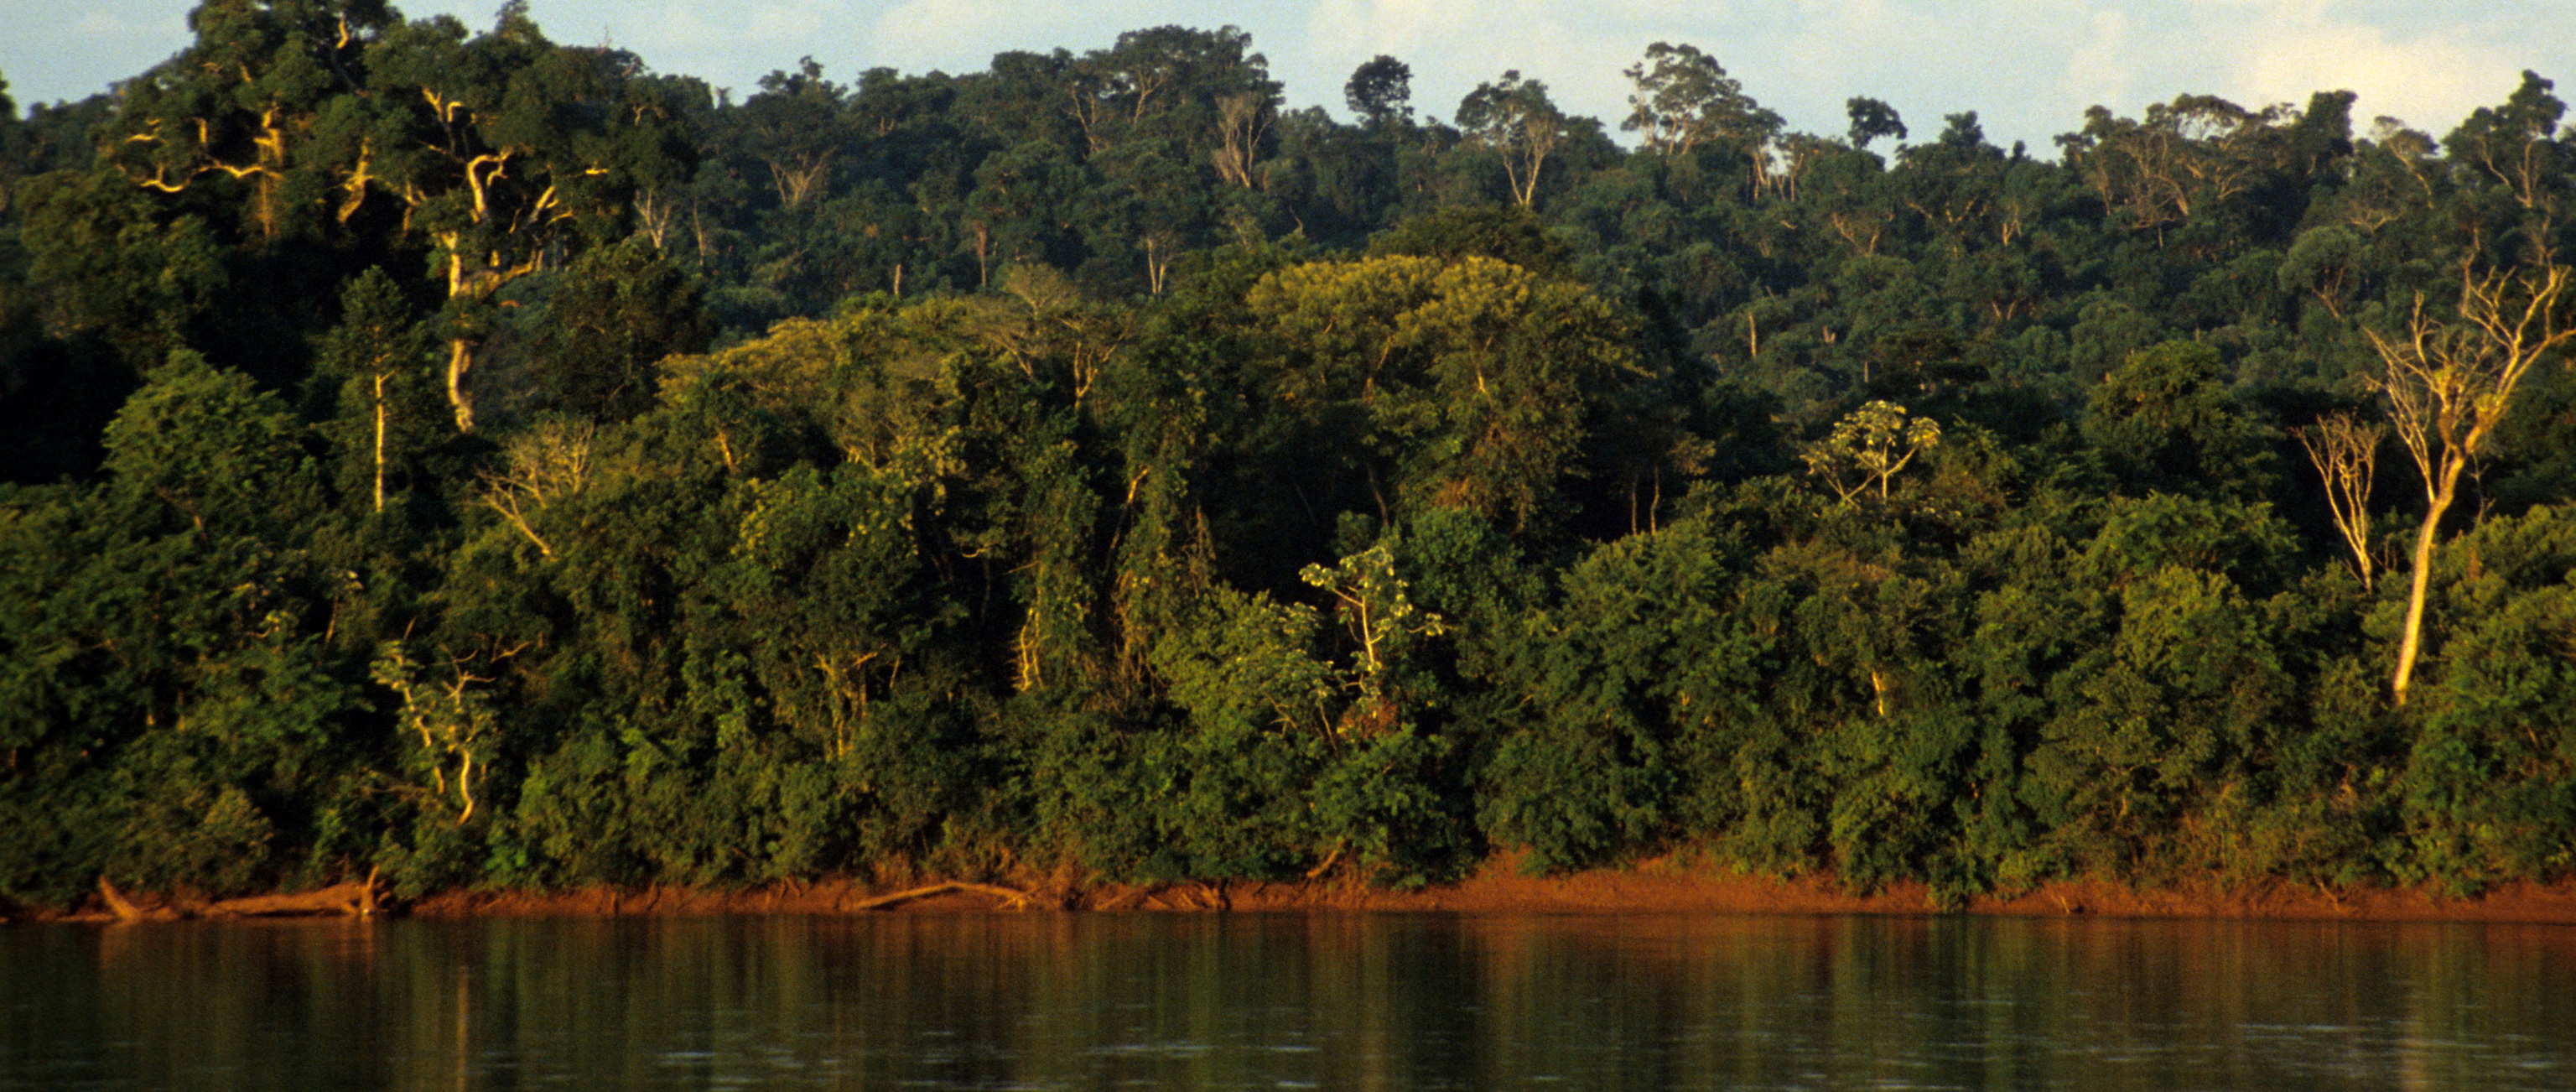 Saving Rainforests with Indigenous Rights-Based Conservation